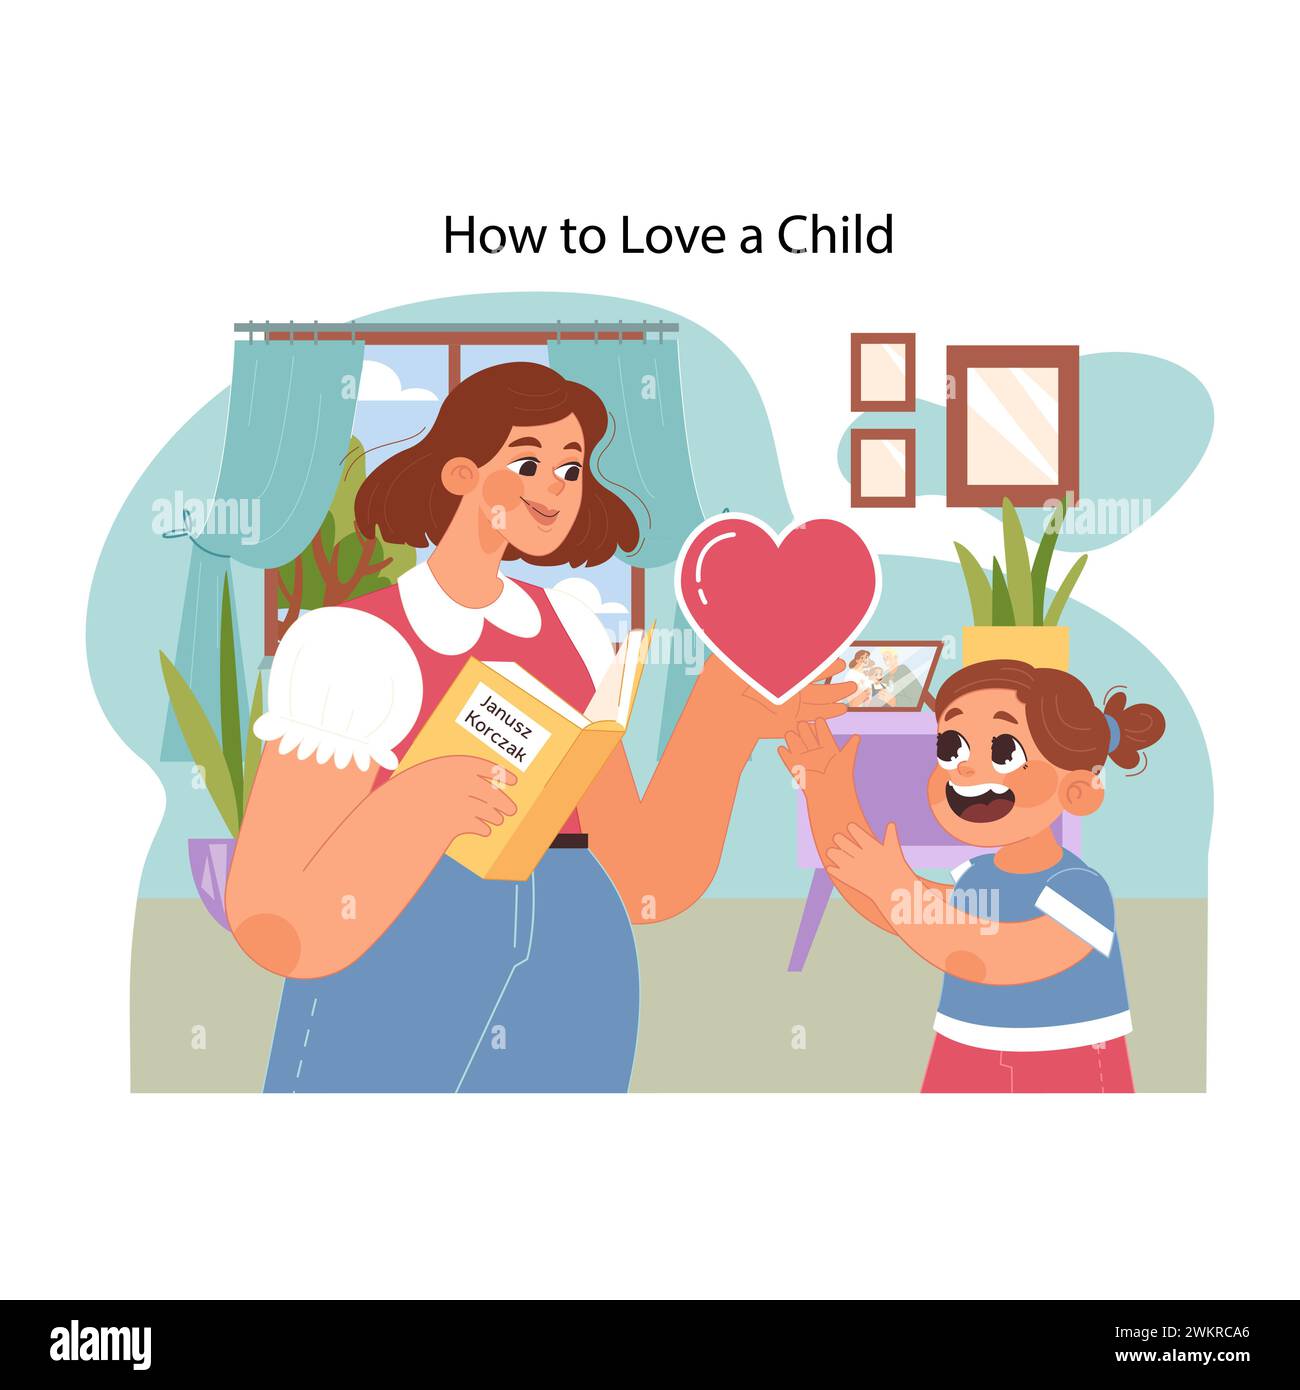 Parent child bonding concept. Mother giving parental love to daughter. Sharing wisdom from How to Love a Child book by Janusz Korczak. Moments of learning, caring, and heartwarming interaction Stock Vector